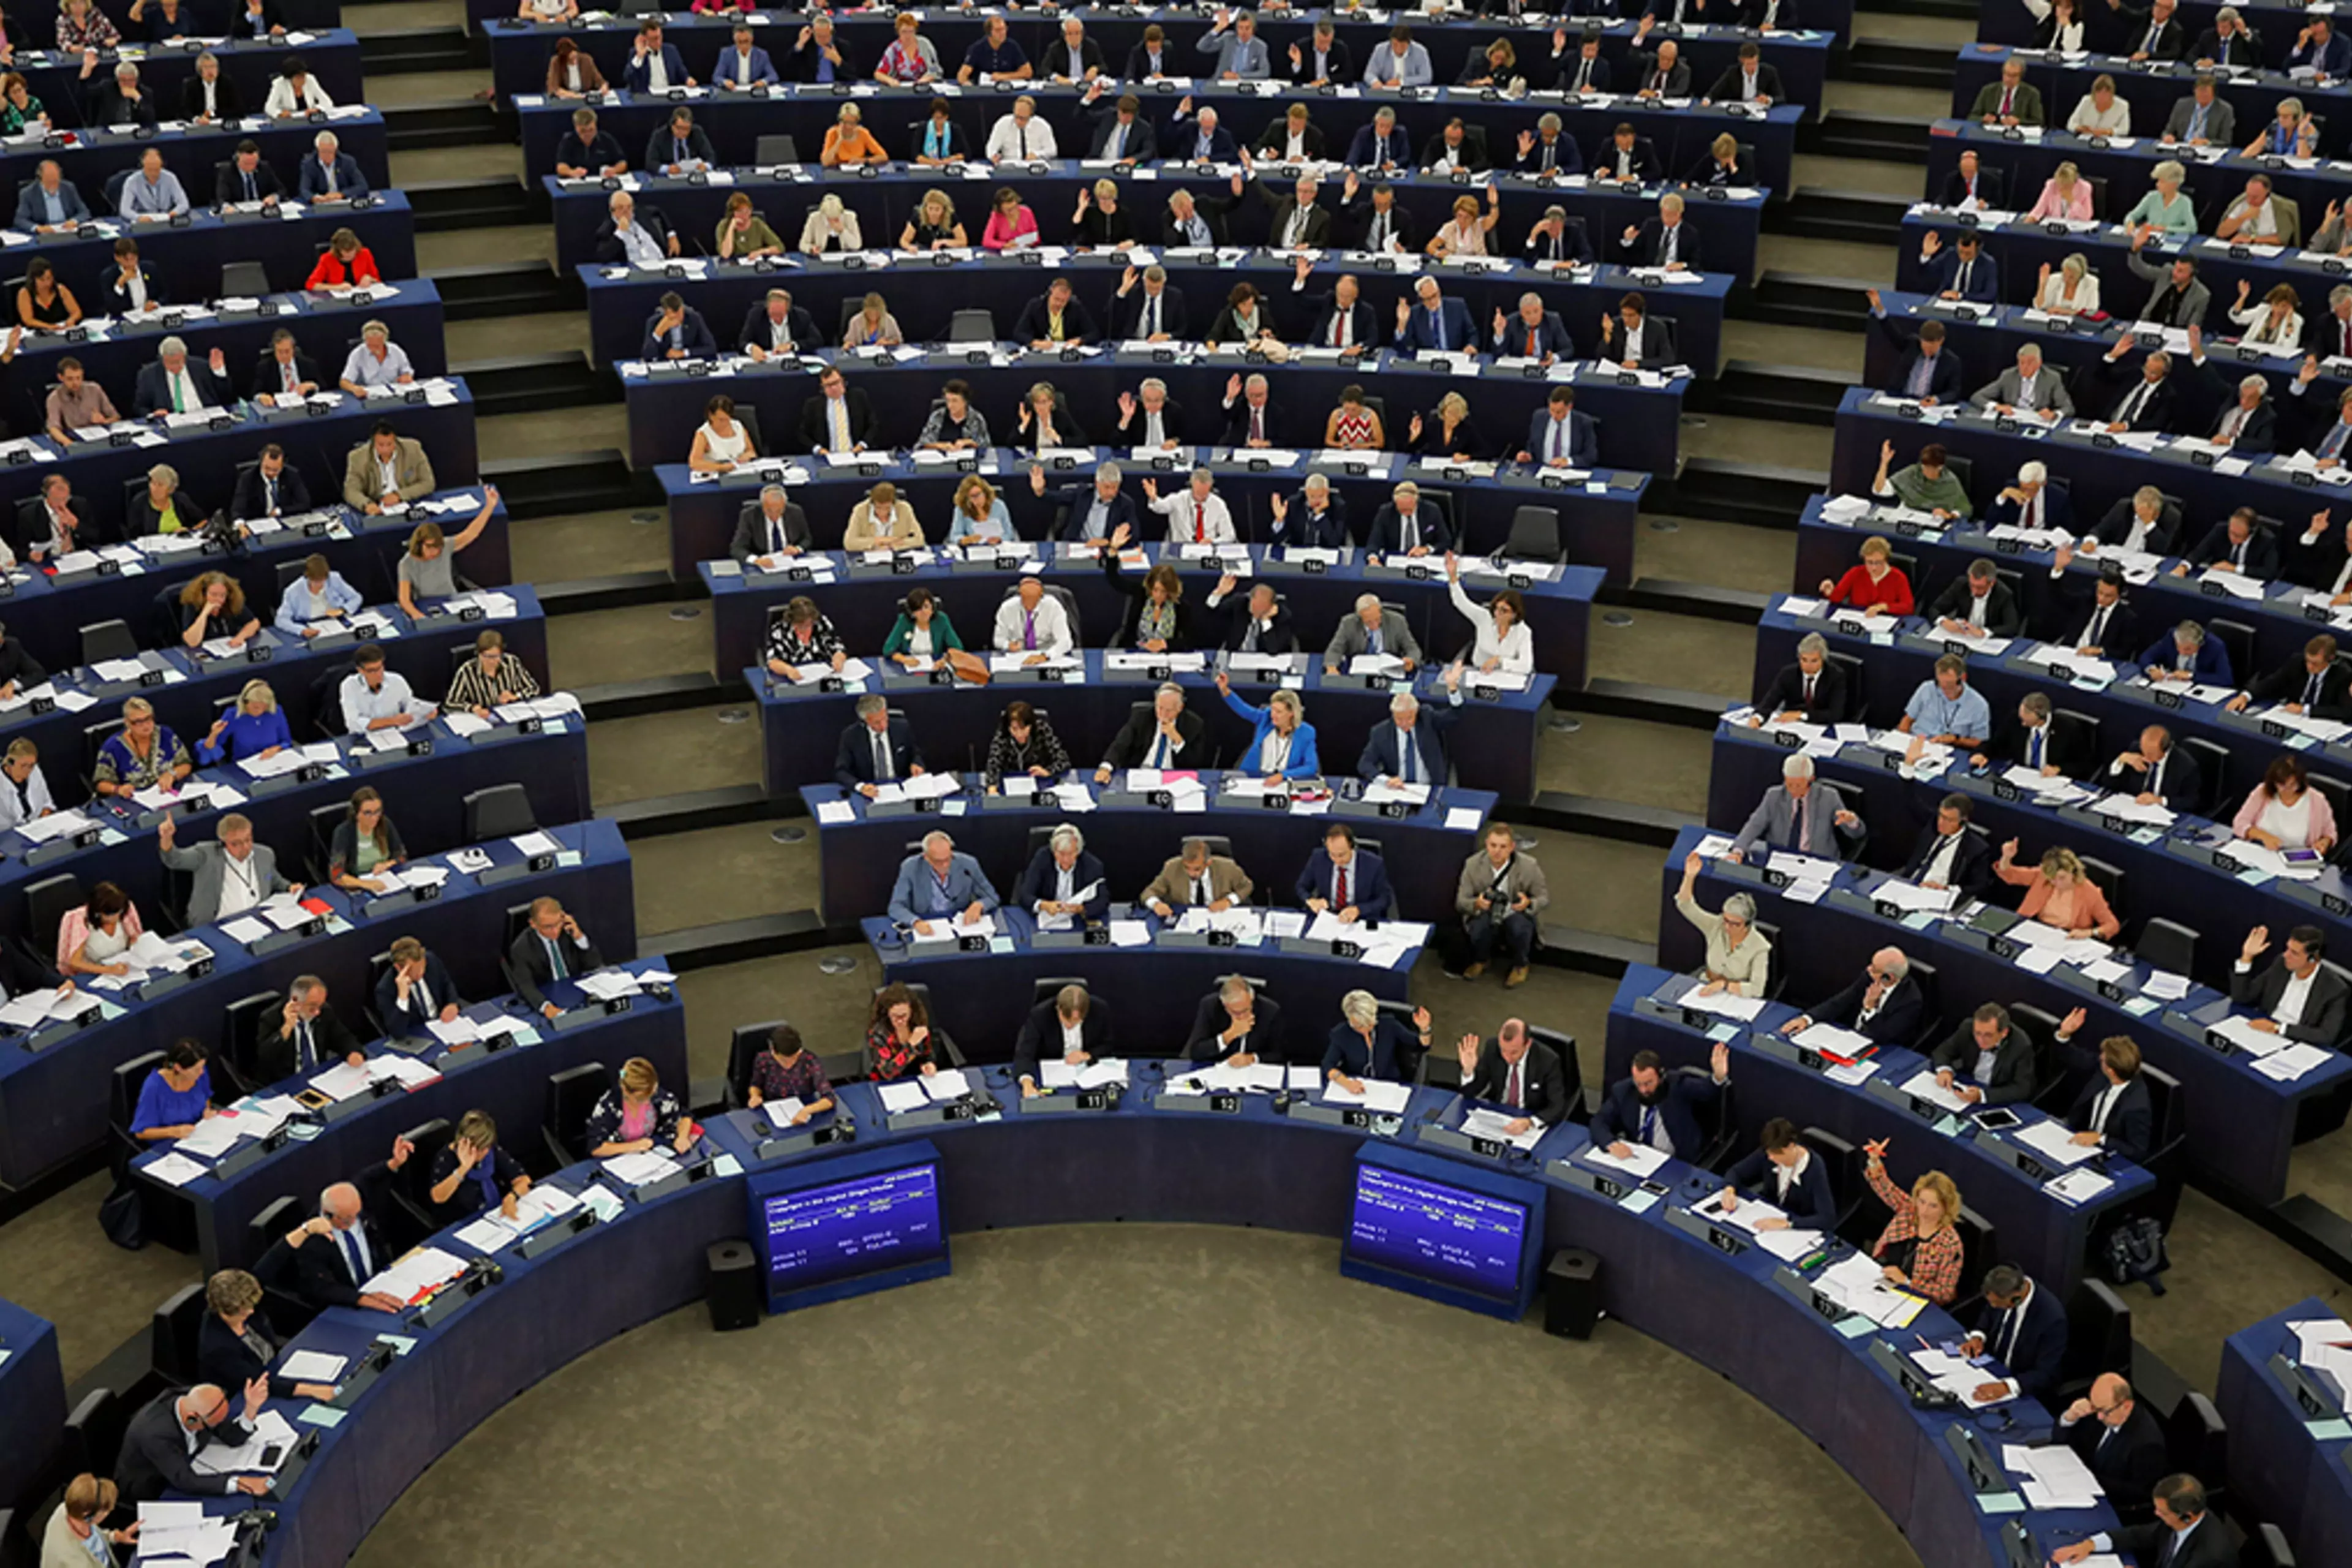 Members of the European Parliament during a voting session at the parliament's seat in France.